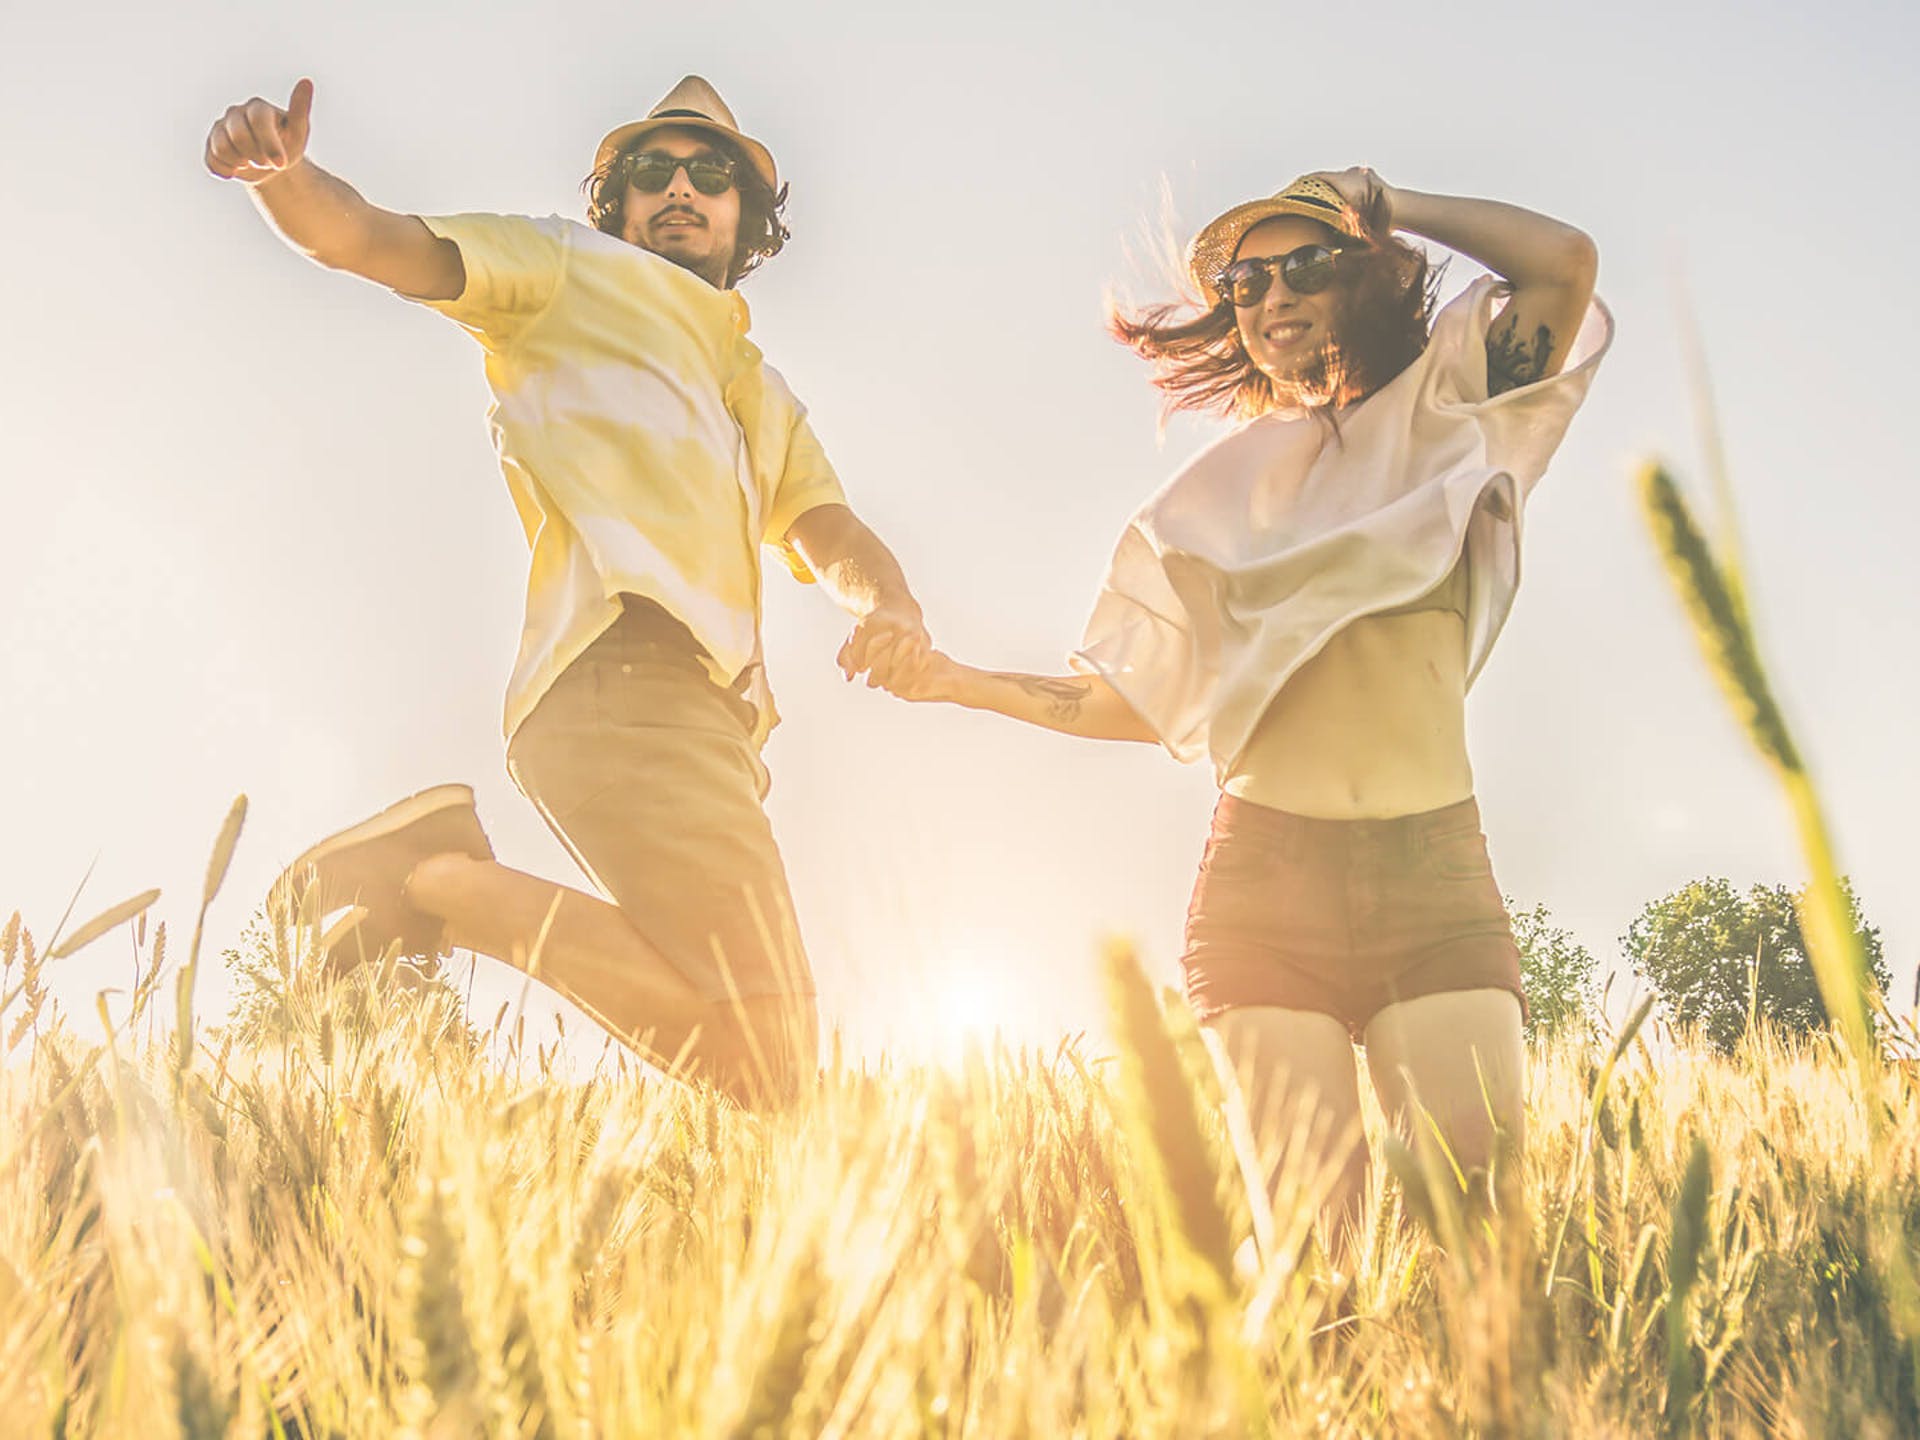 Couple wearing hats and sunglasses jumping up in a sunny wheat field